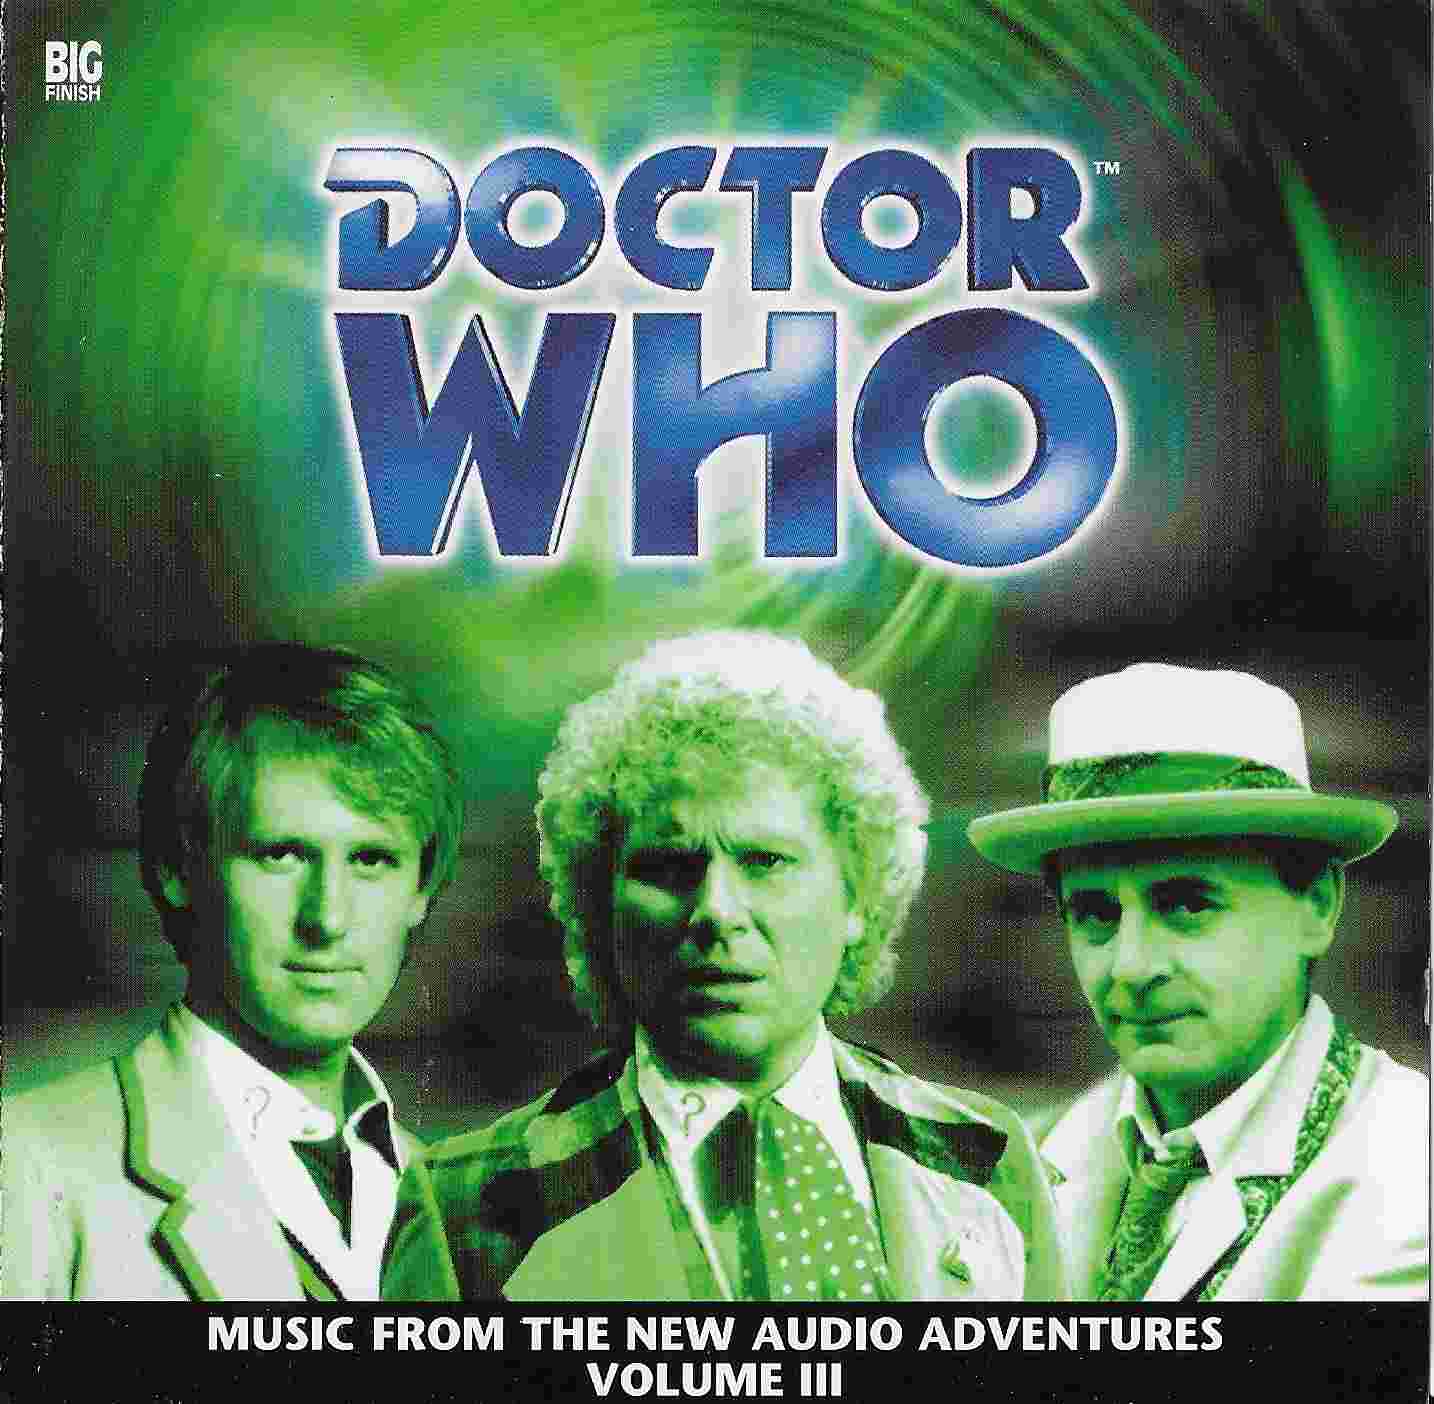 Picture of Doctor Who - Music from the new adventures - Volume 3 by artist Various from the BBC cds - Records and Tapes library